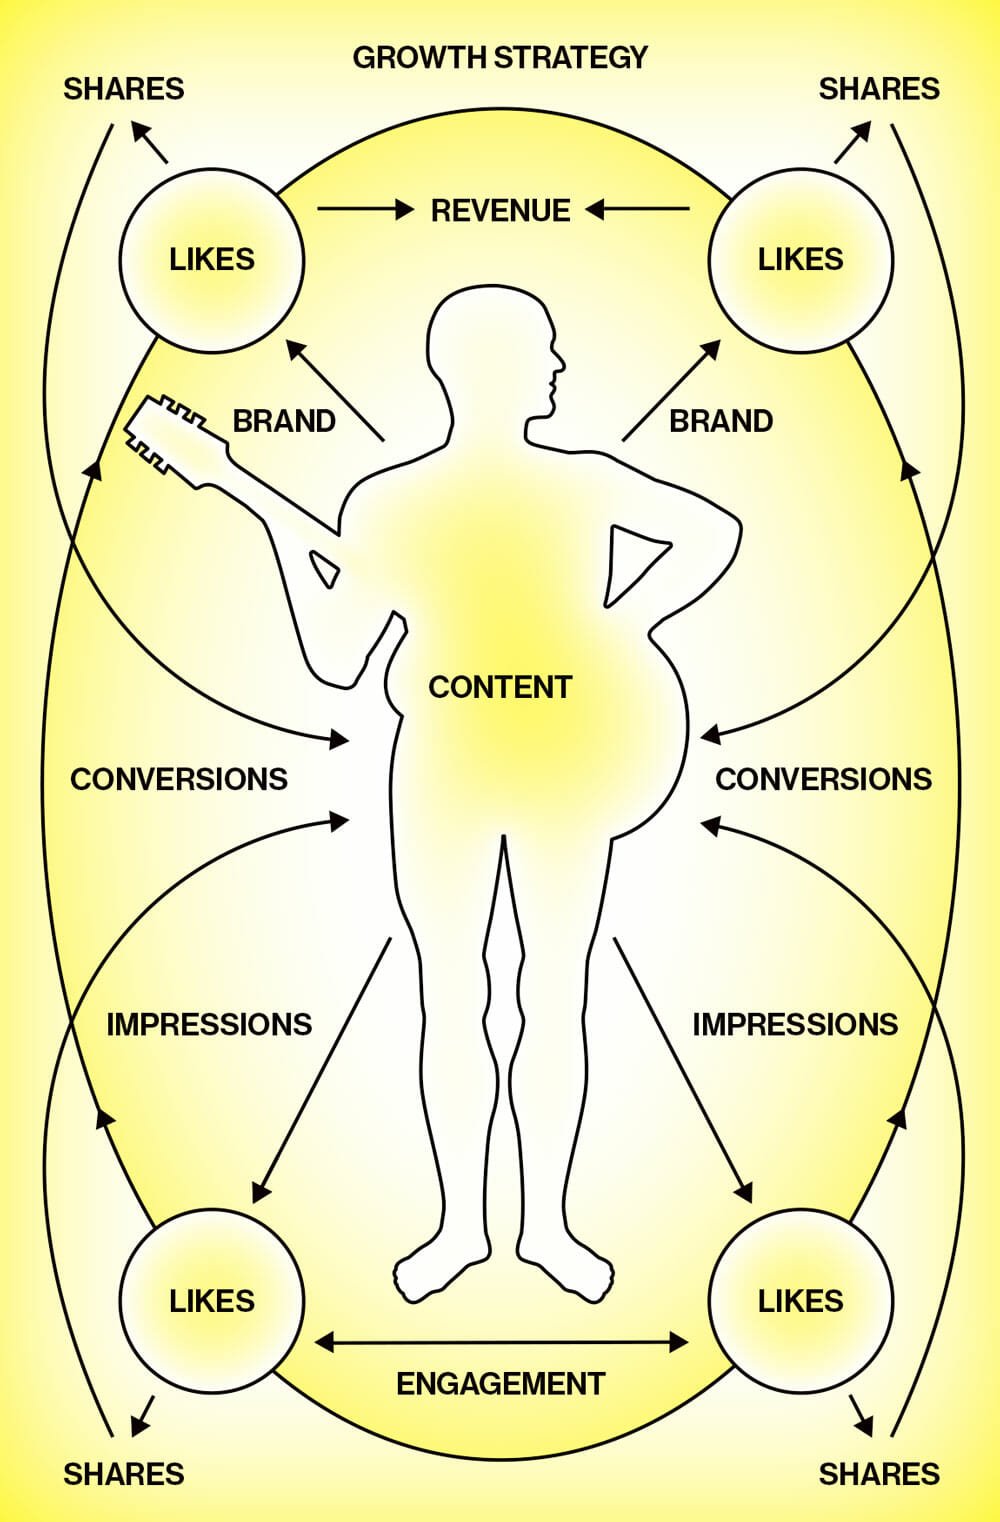 Parodying a digital marketing growth diagram, the outline of a musician holding a guitar is bombarded by flowchart lines, their arrows reading "IMPRESSIONS," "LIKES," "SHARES," "ENGAGEMENT," "CONVERSIONS," "REVENUE" and "BRAND." The word "CONTENT" is stamped over the guitar.